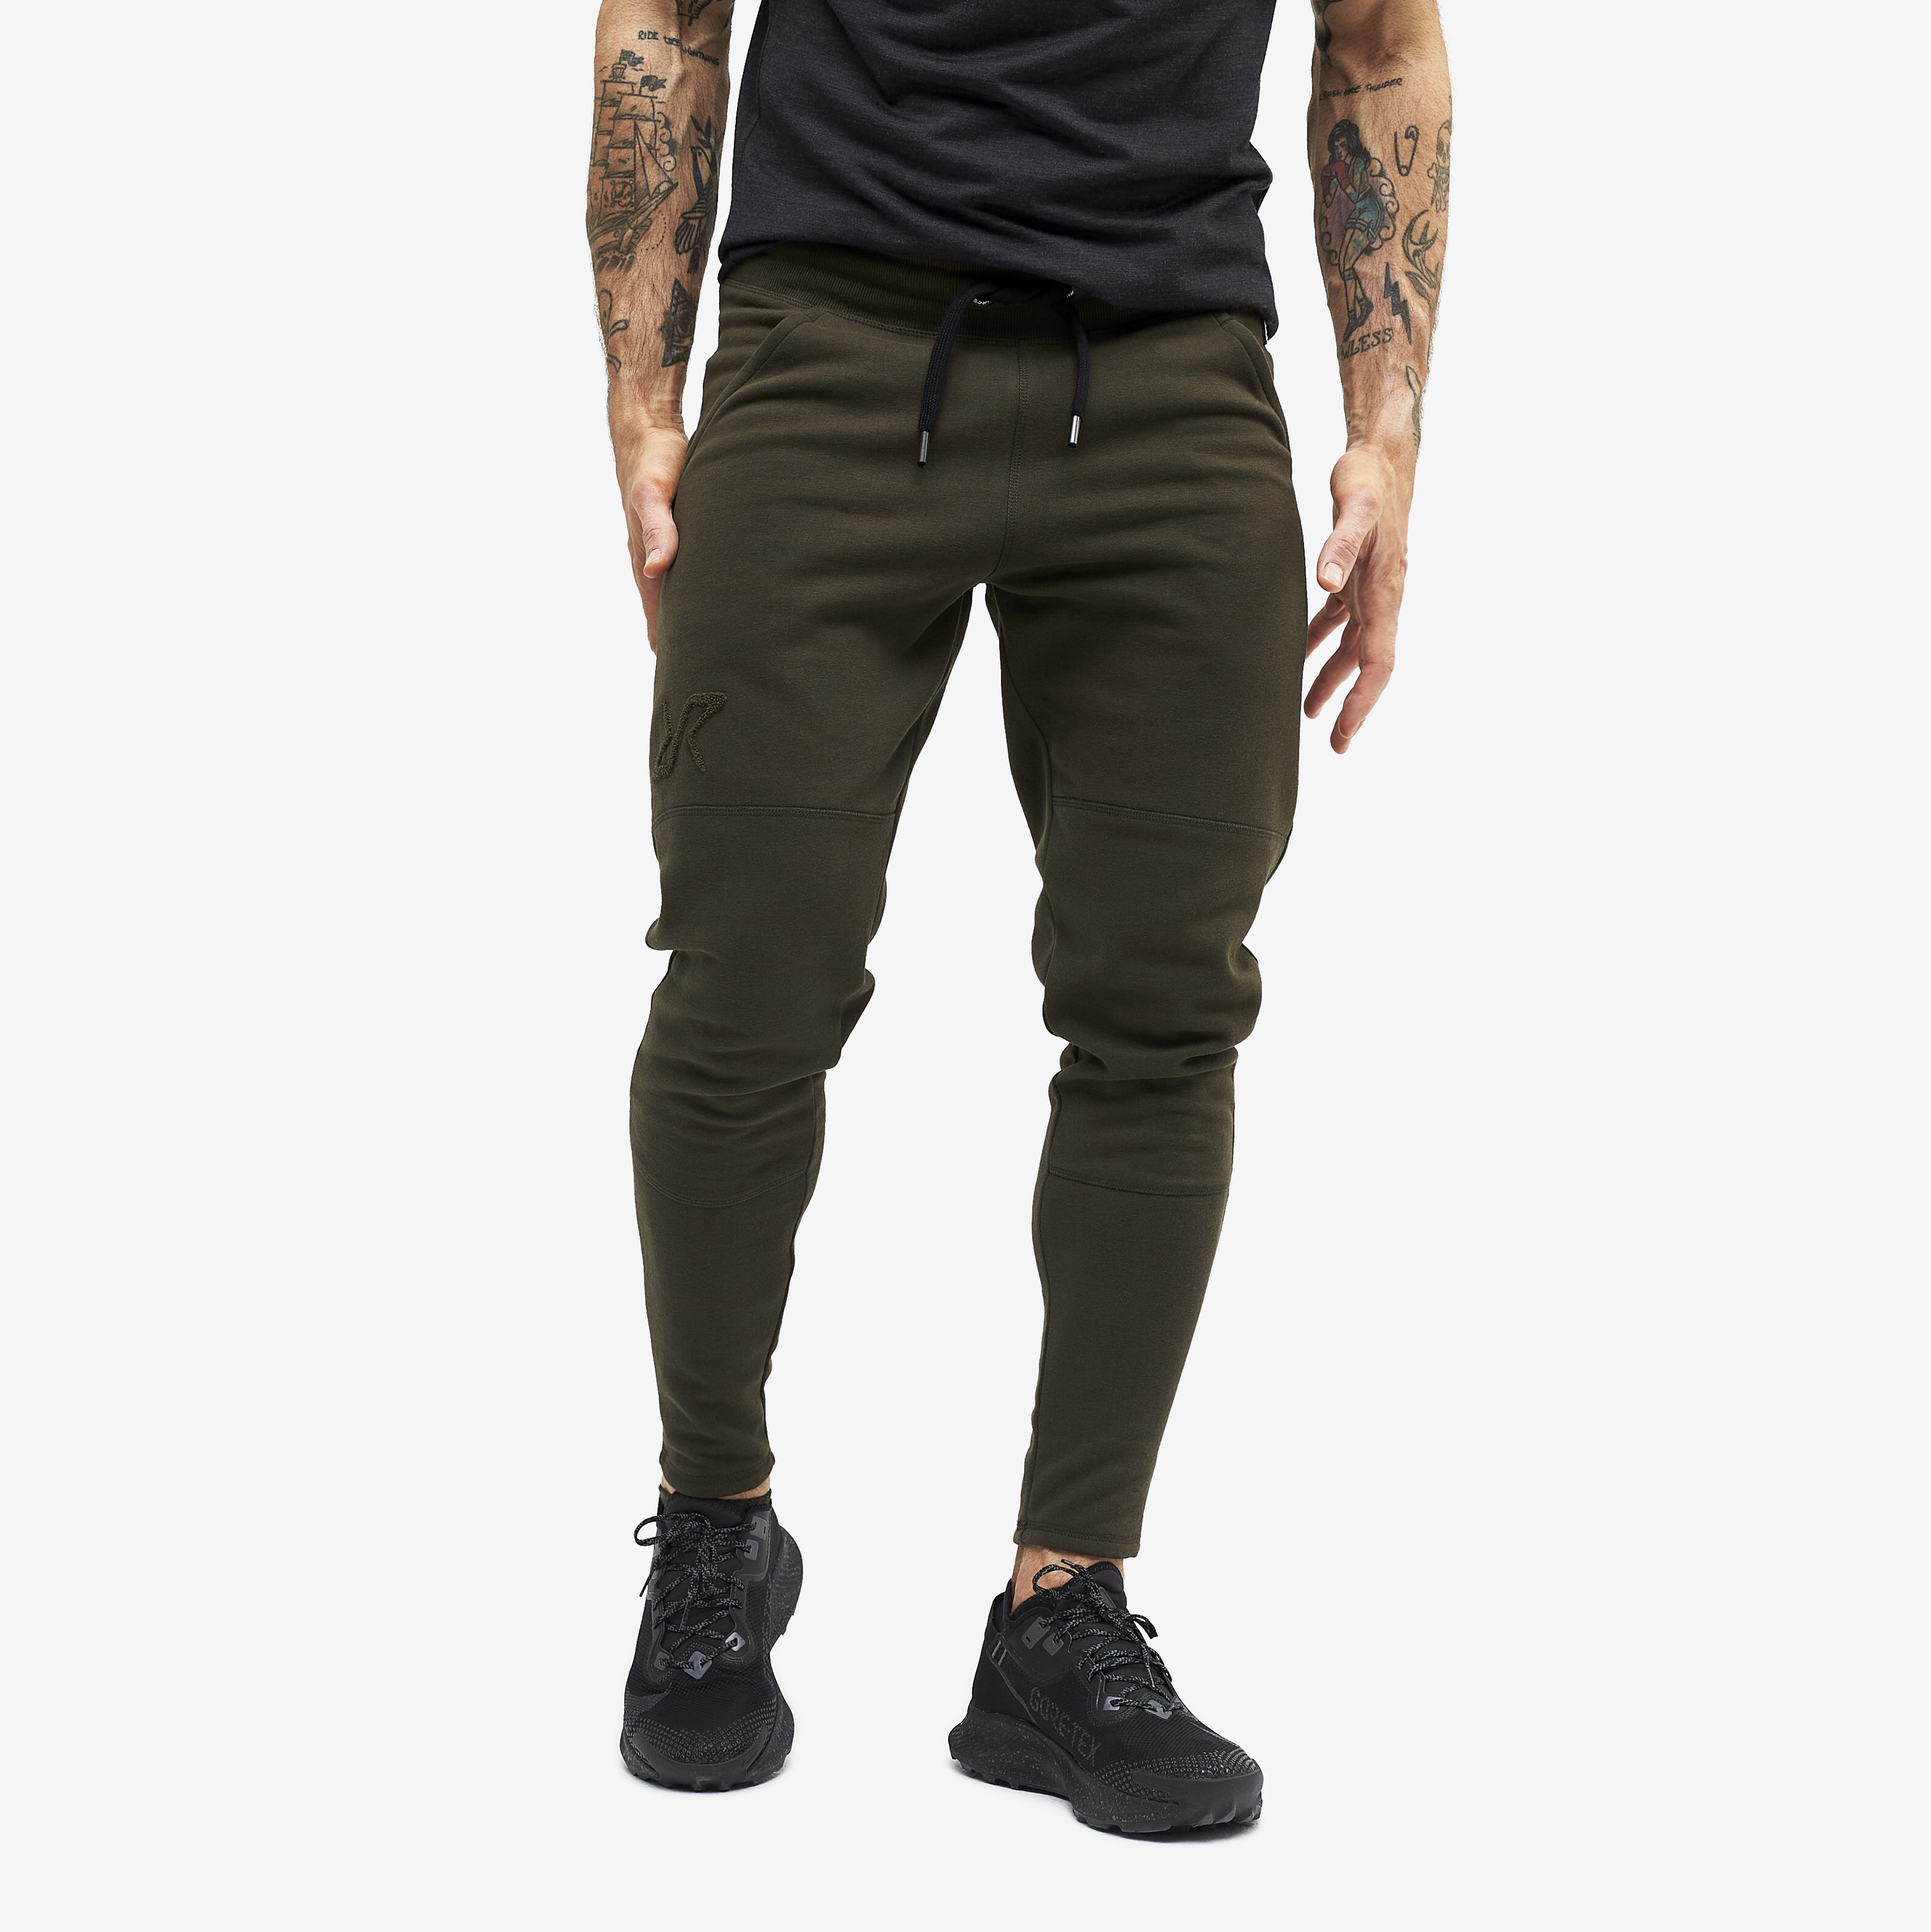 Chill Trousers Mud Men